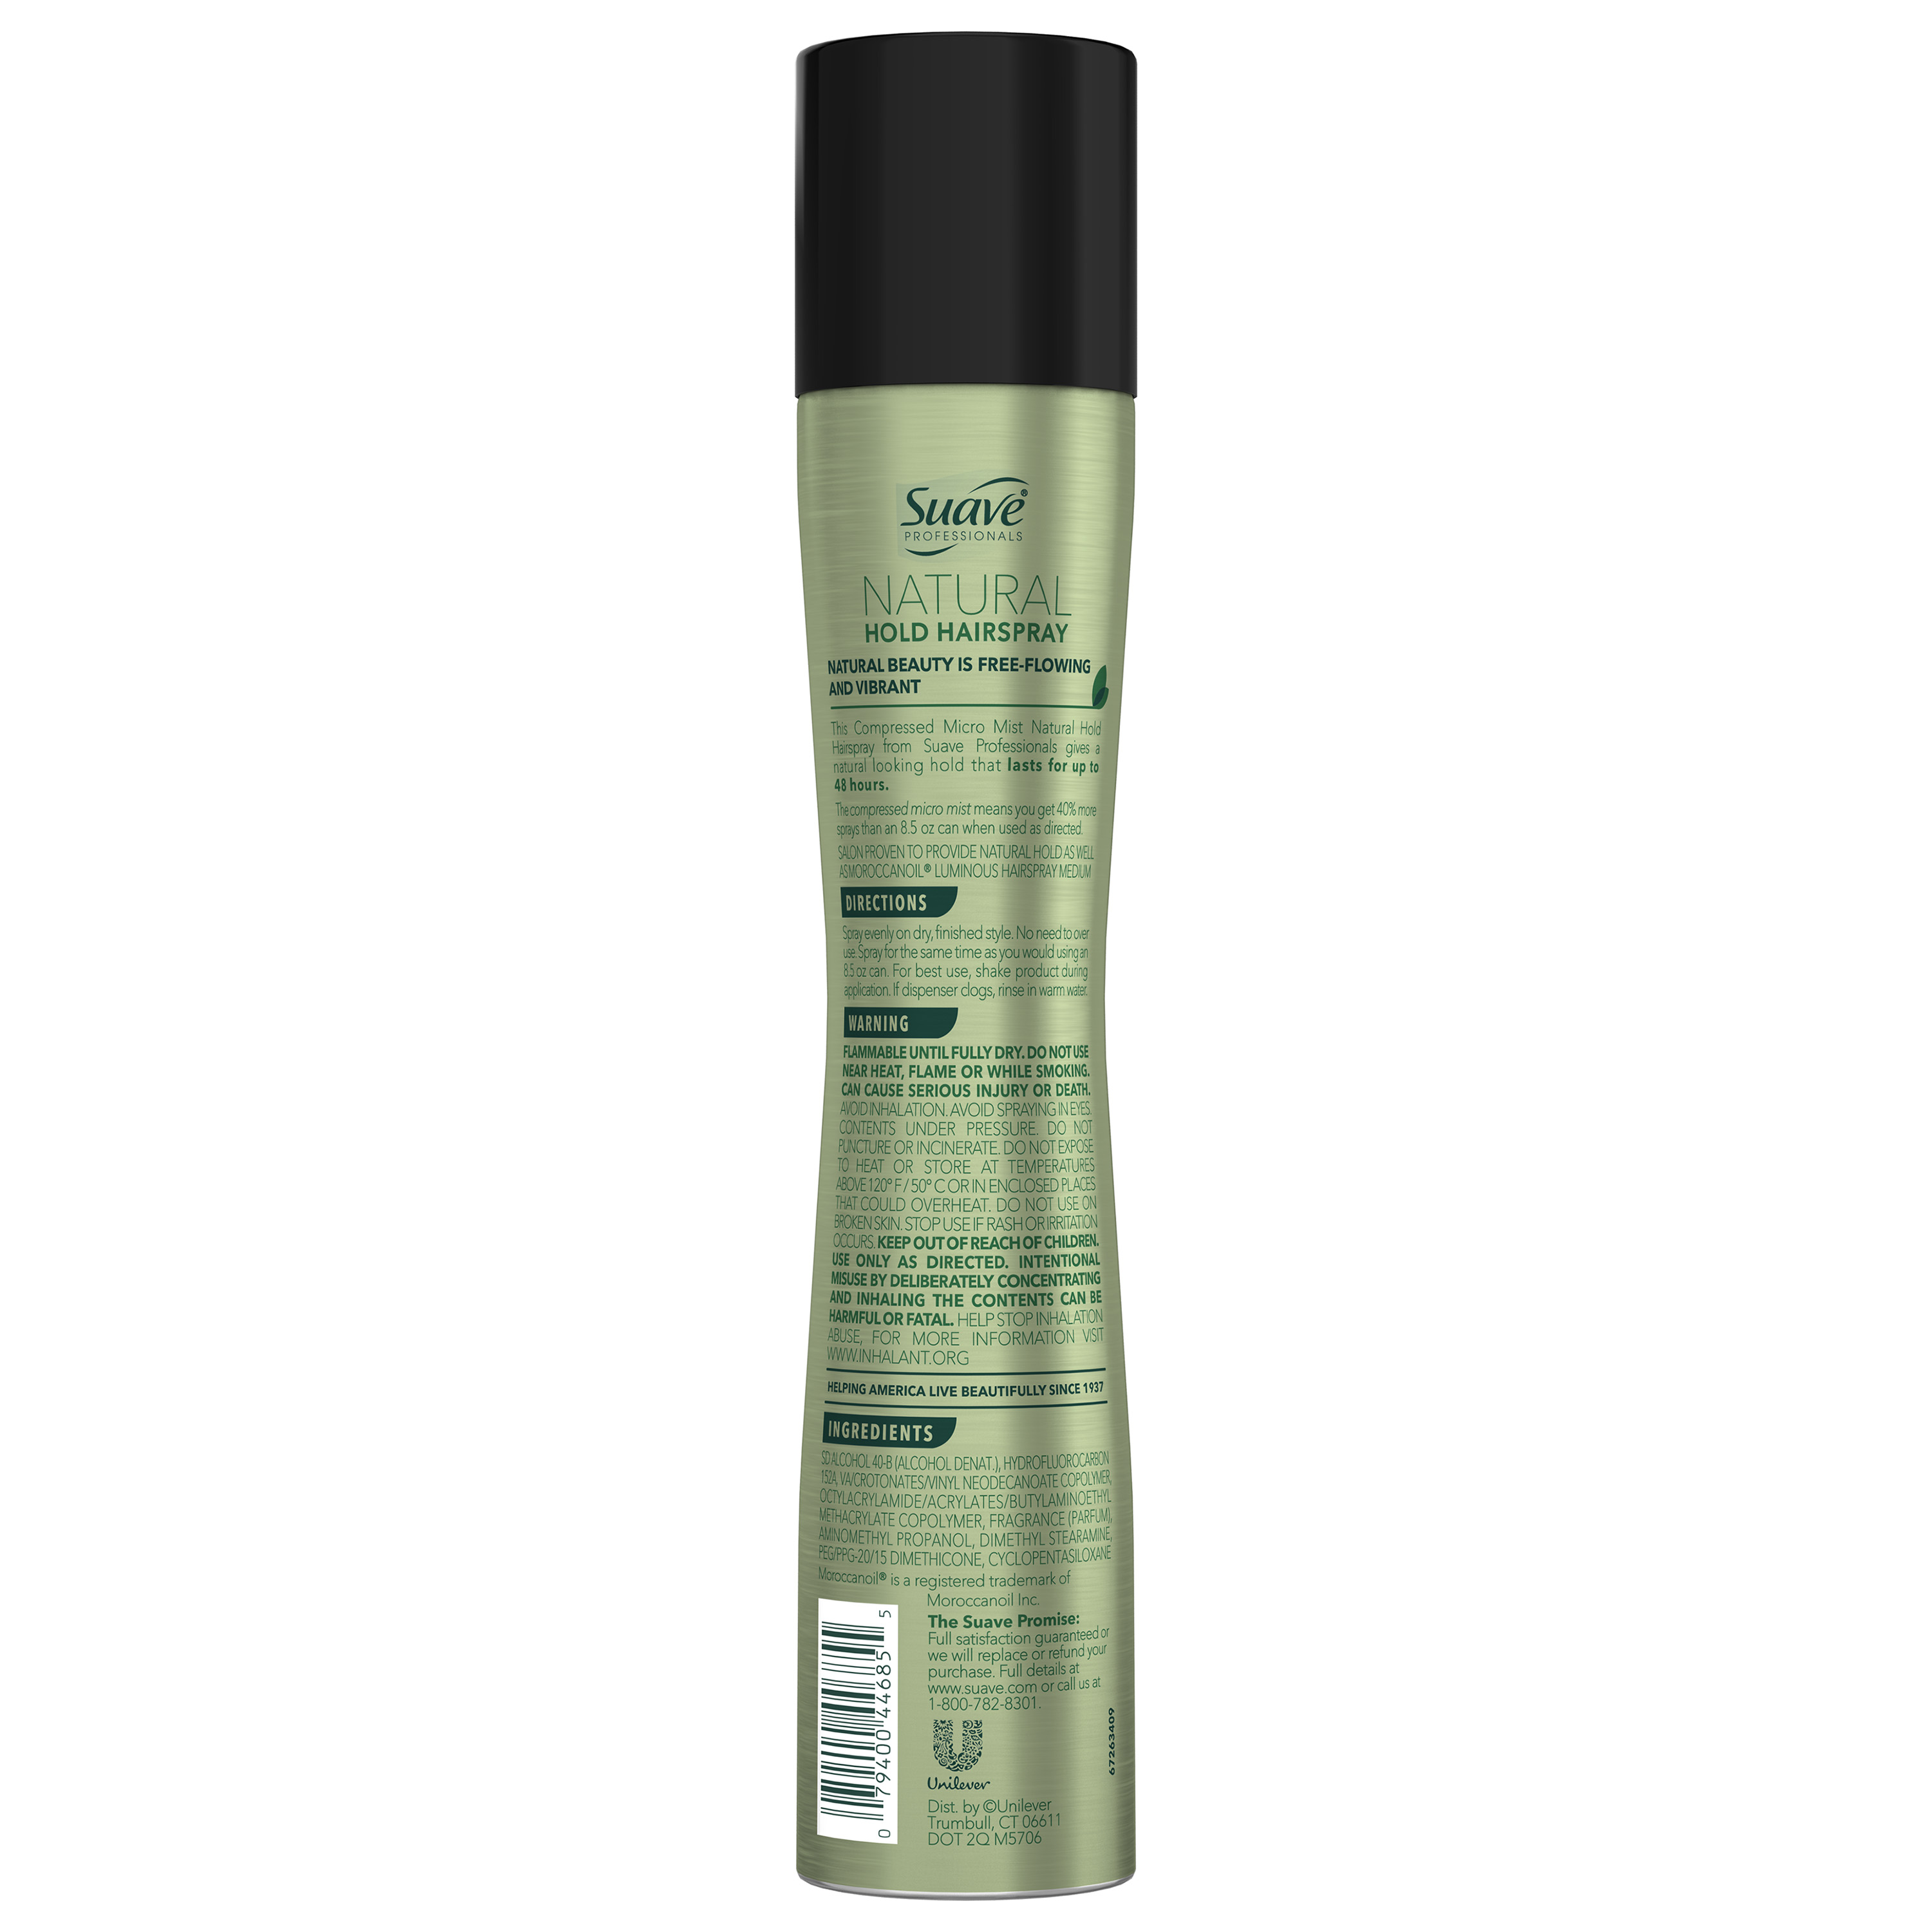 Suave Professionals Compressed Micro Mist Natural Hold Hairspray, 5.5 oz - image 2 of 13